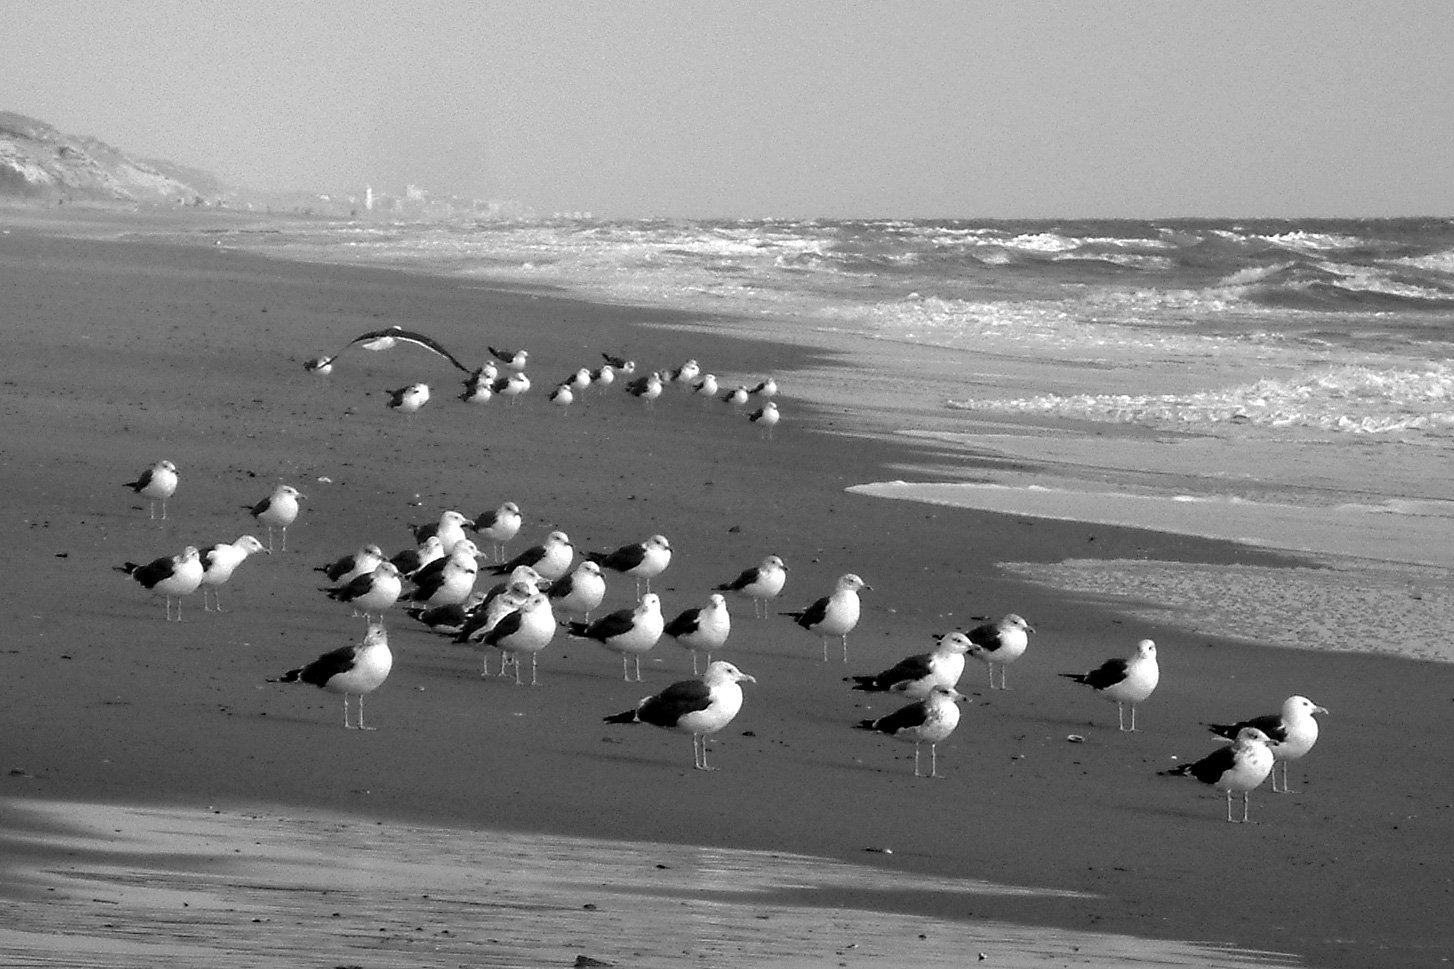 some seagulls walking on a beach during the day